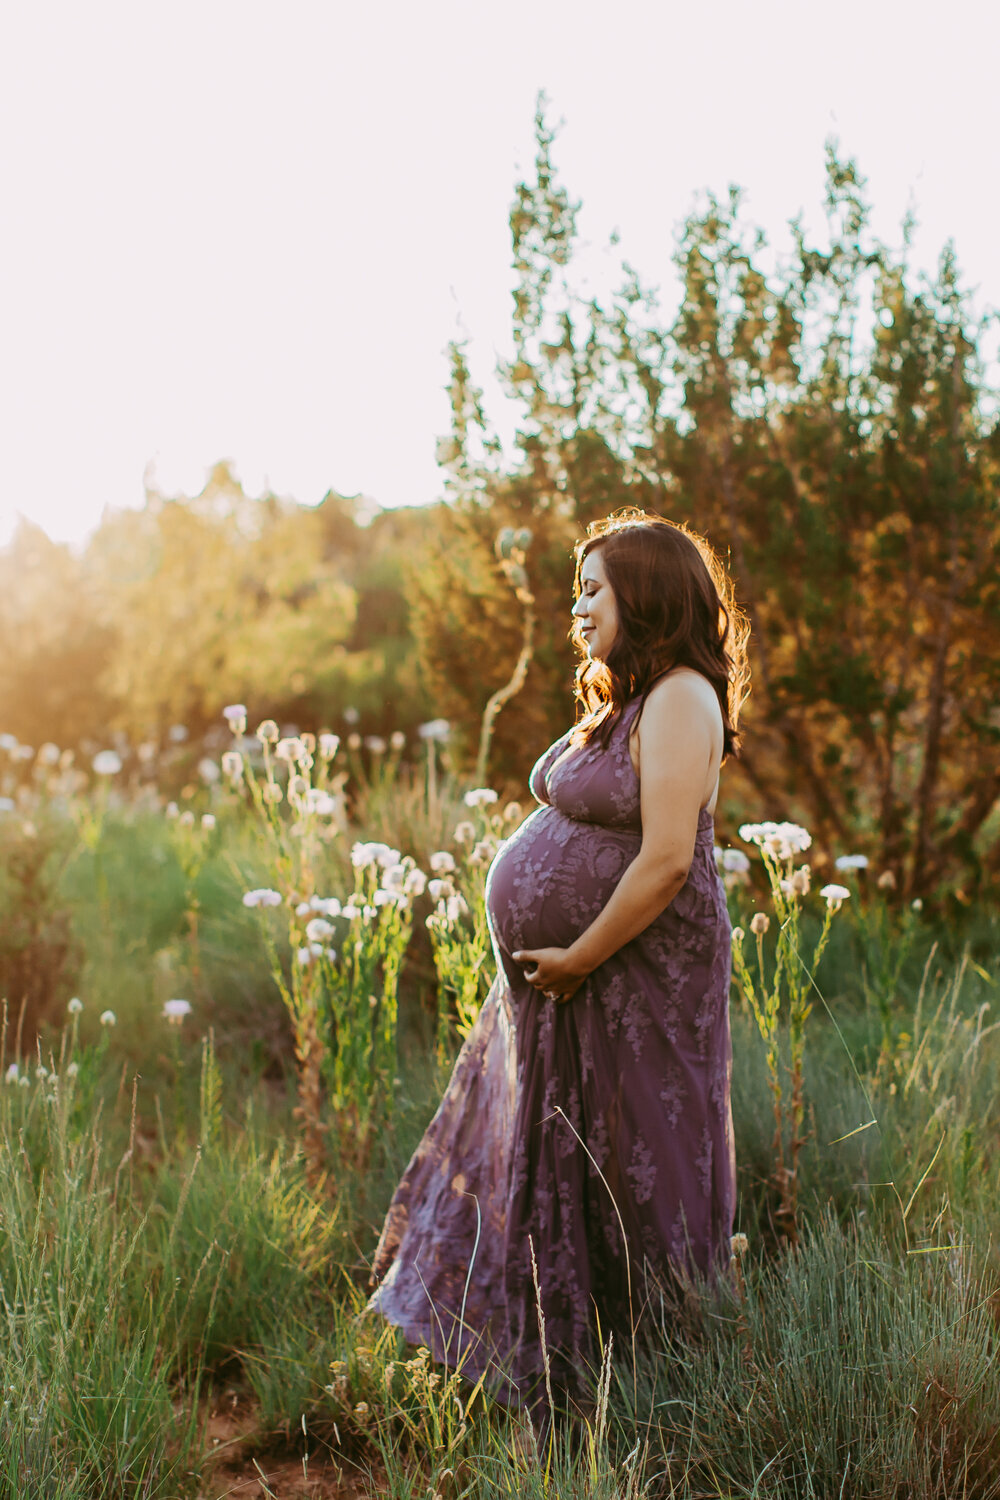  The sun set lit the wildflowers in the field on fire during this maternity photo shoot #tealawardphotography #texasmaternityphotographysession #amarillophotographer #amarilloematernityphotographer #emotionalphotography #lifestylephotography #babyontheway #lifestyles #expectingmom #newaddition #sweetbaby #motherhoodmagic 